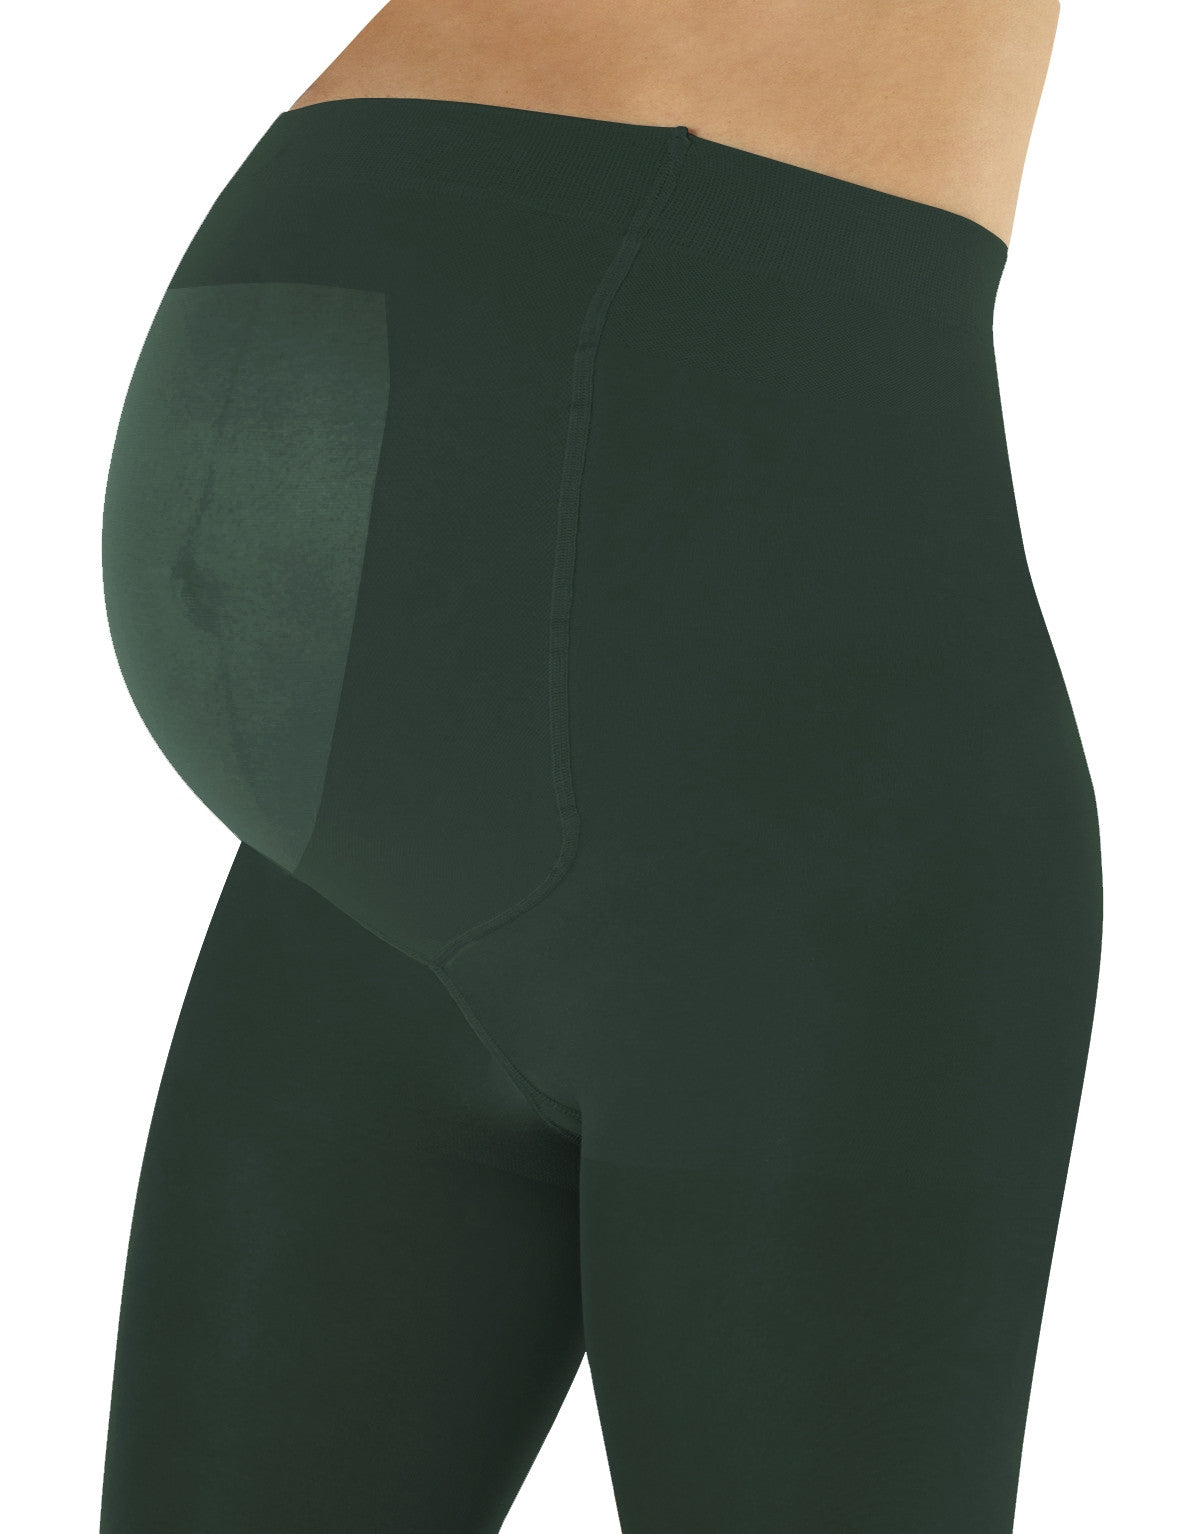 Calzitaly 100 Den Maternity Tights - Bottle green ultra opaque pregnancy tights with an extra panel and flat seam.